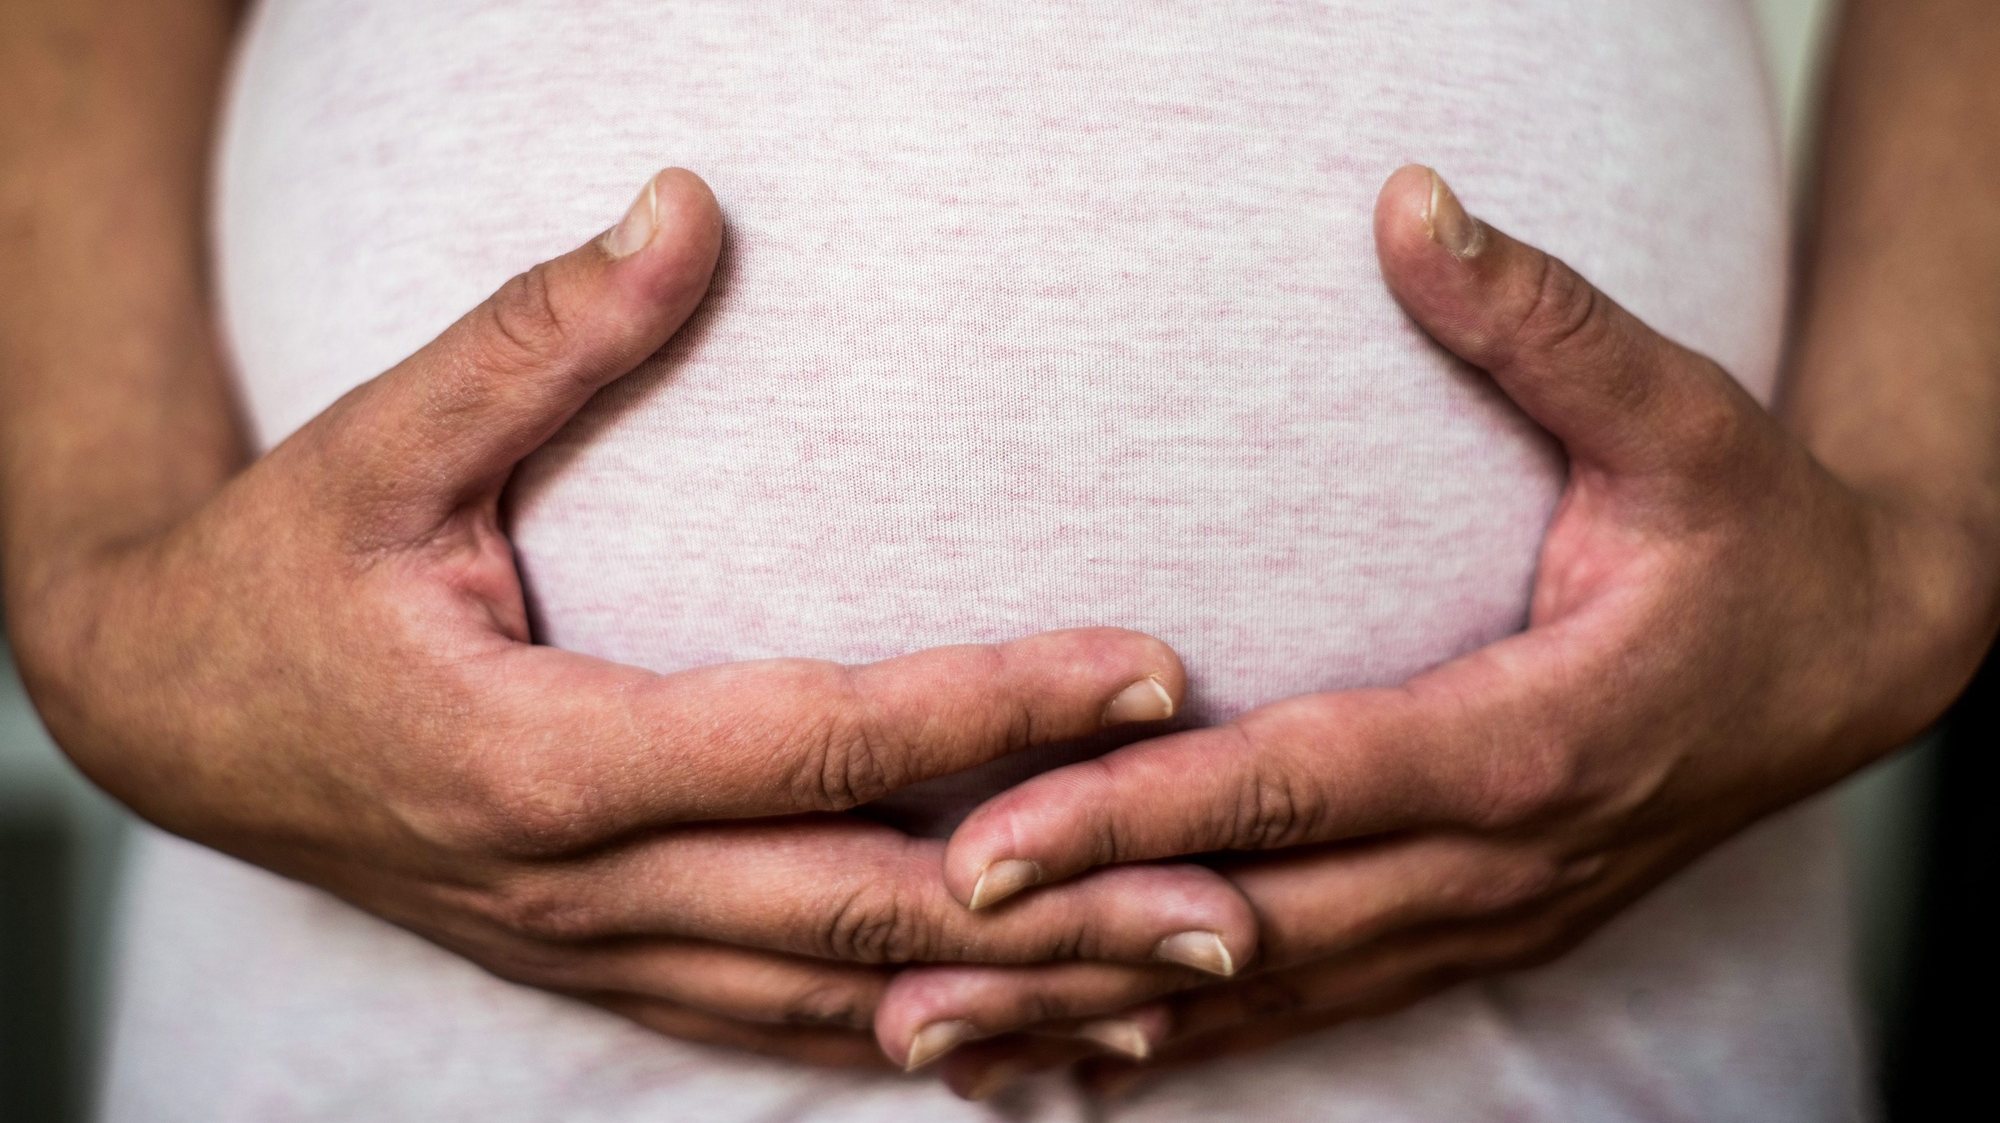 epa05286806 (01/15) A pregnant woman holds her belly at Lea Mothers&#039; Home in Erd, Hungary, 30 April 2016. The Lea Home assists many of these young women who are under crisis while becoming mothers, and supports them to get ready to live the life of a normal family. One of the main tasks of the home is to grant babies a peaceful and suitable place to come into the world in decent circumstances. It also helps babies and young mothers to stay together after the successful delivery despite of their disadvantageous backgrounds.  EPA/ZOLTAN BALOGH PLEASE REFER TO THIS ADVISORY NOTICE (epa05286805) FOR FULL PACKAGE TEXT; HUNGARY OUT